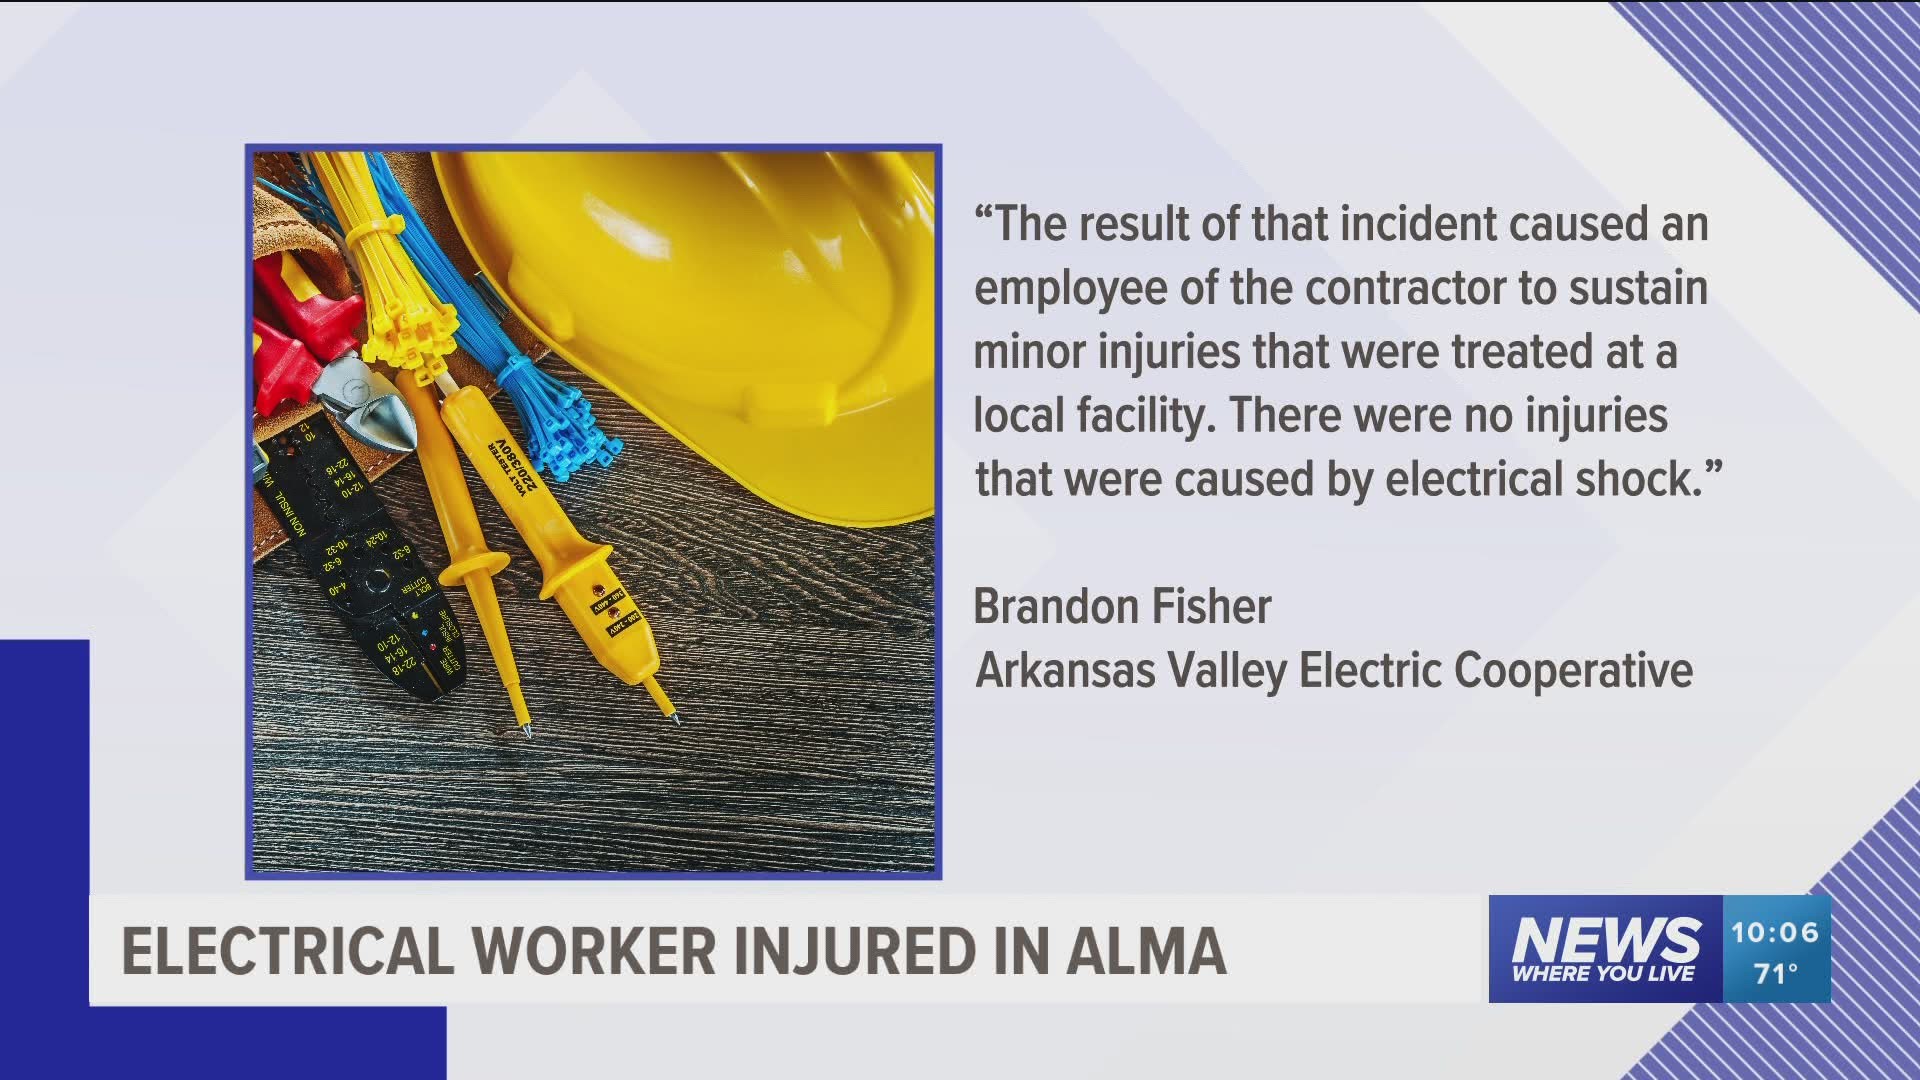 Electrical worker injured in Alma